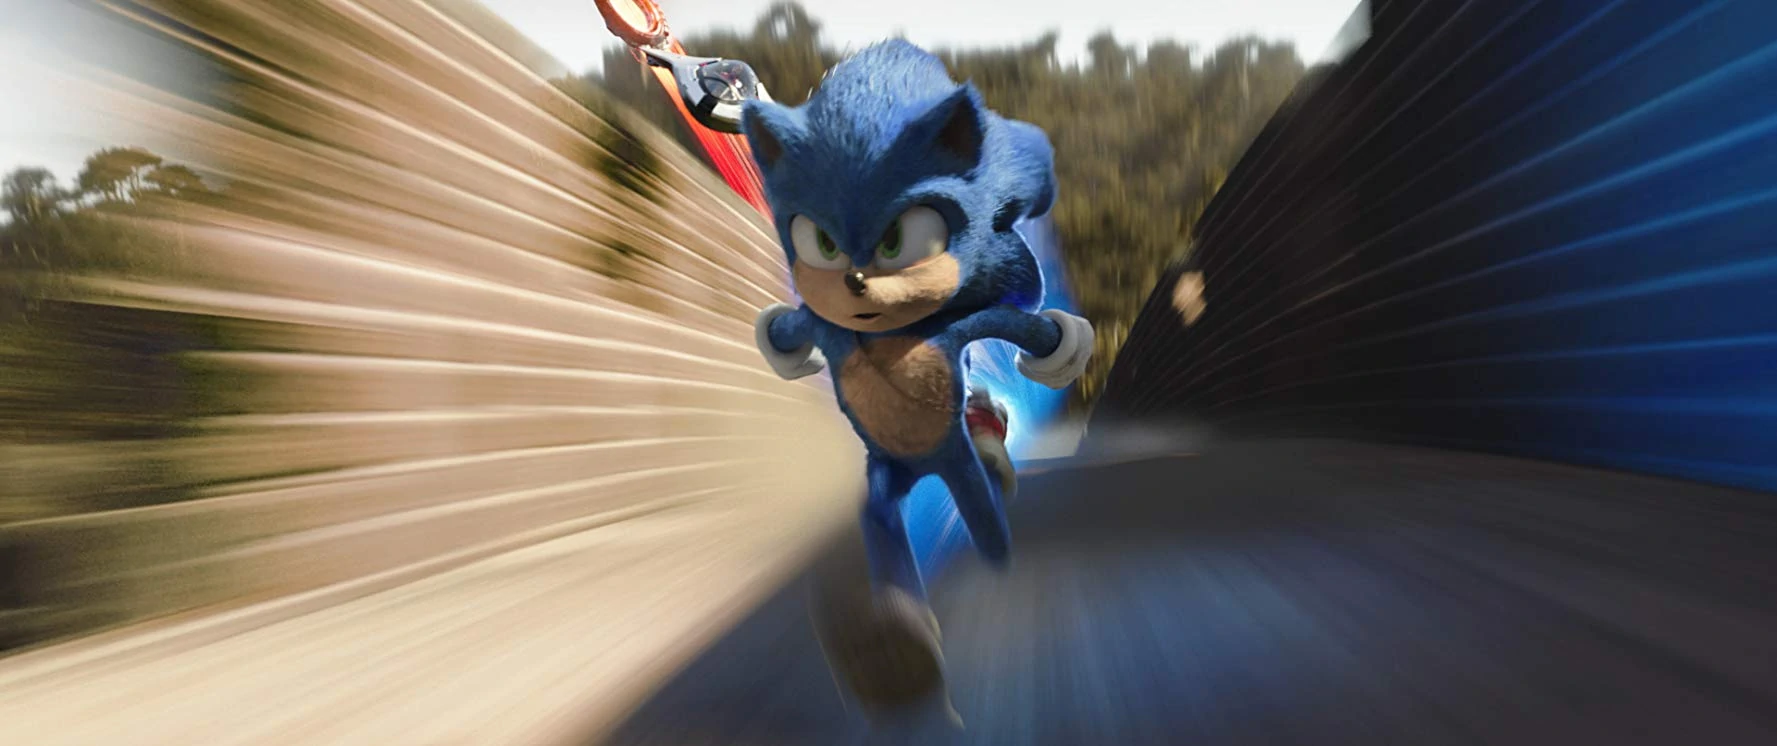 Sonic the Hedgehog 2: The Official Movie Pre-Quill